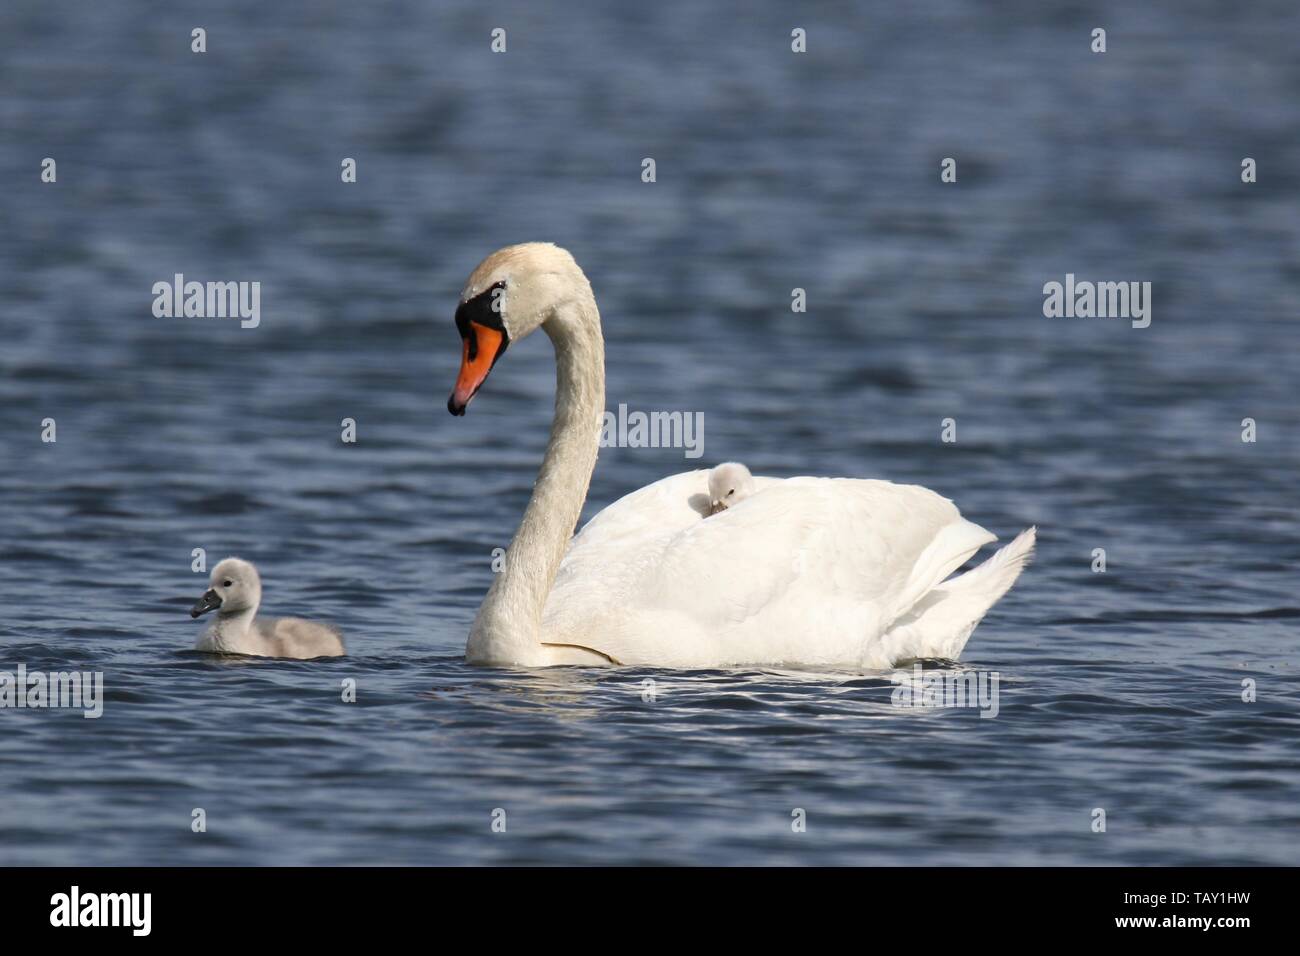 A mute swan Cygnus olor with cygnets swimming on a blue lake in Spring a tired cygnet is riding on the back of the mother swan Stock Photo